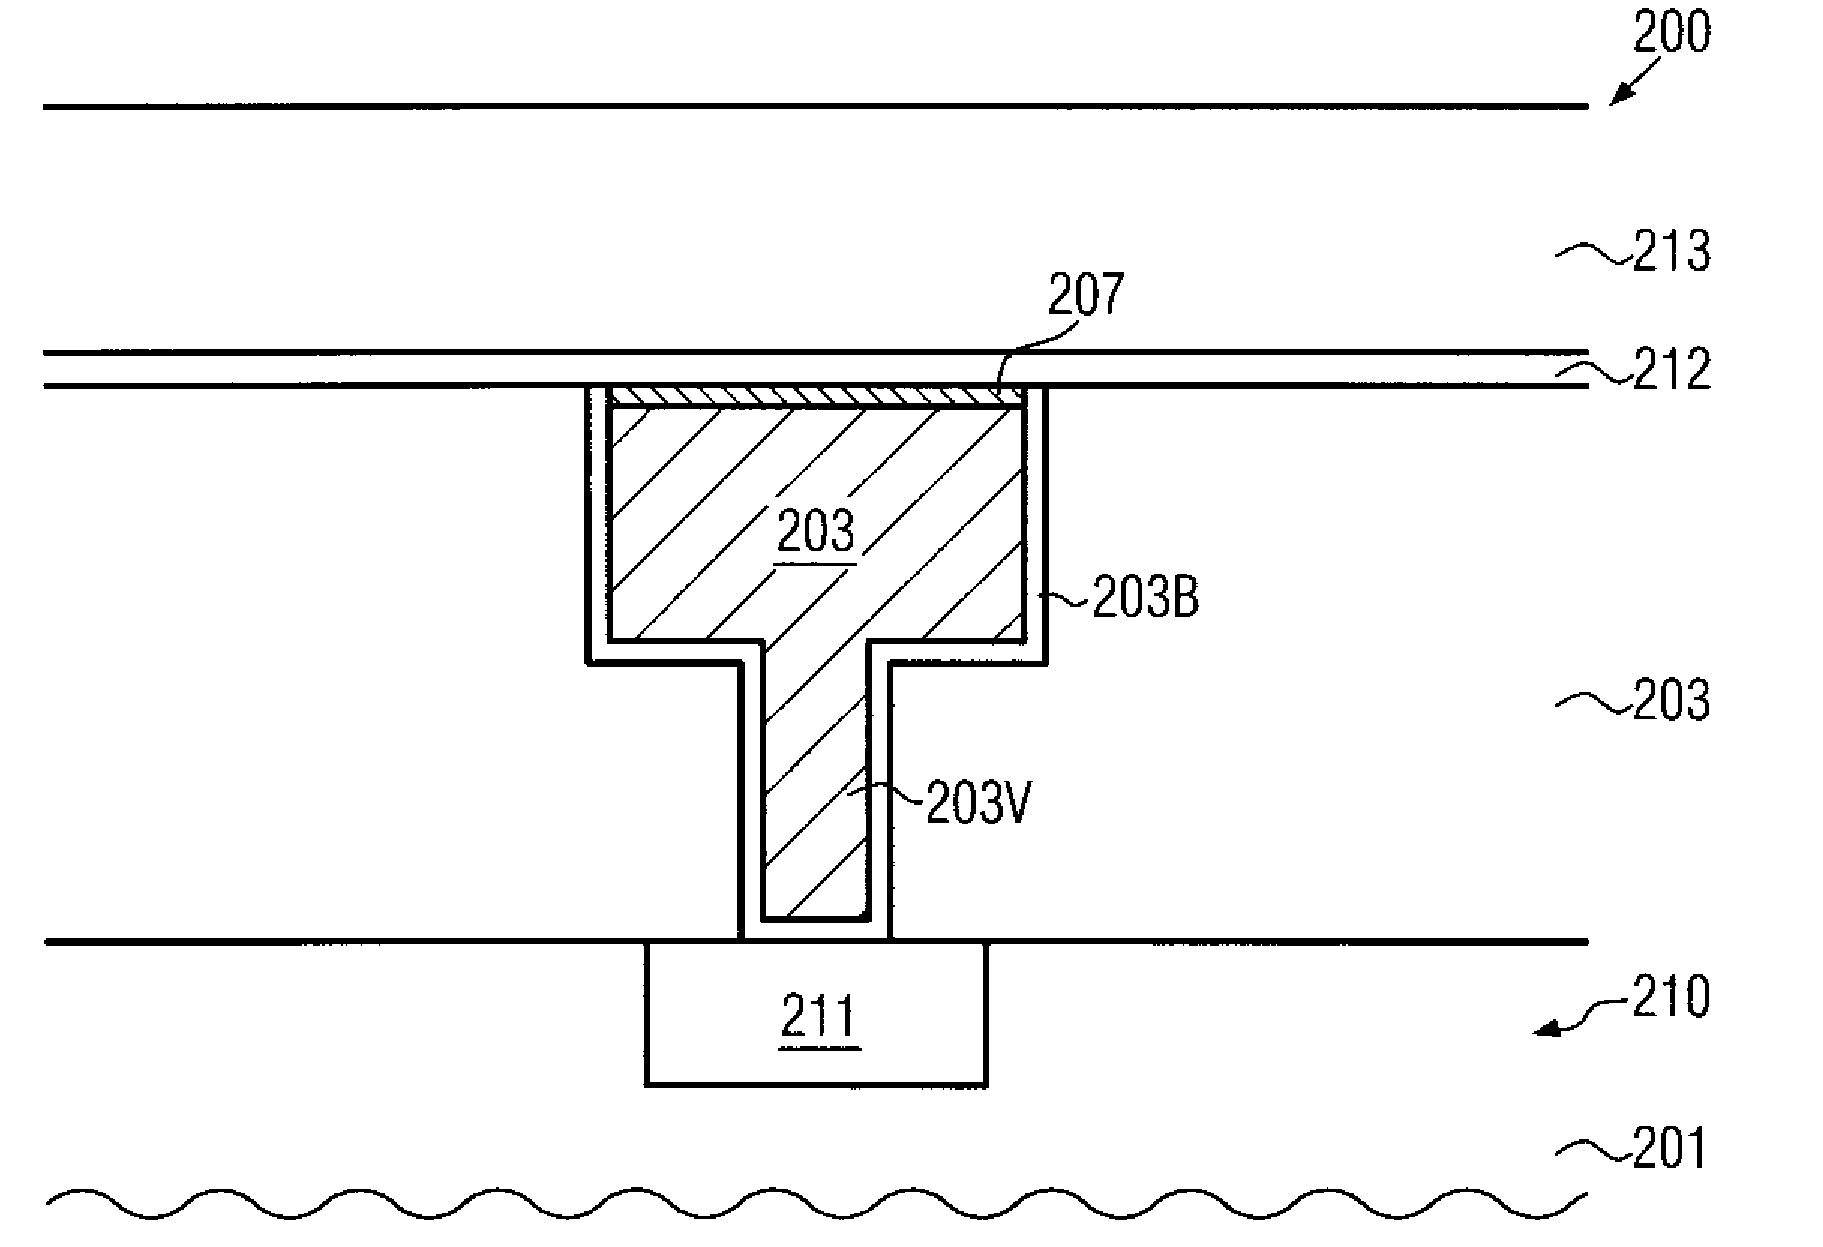 Method for forming a self-aligned nitrogen-containing copper silicide capping layer in a microstructure device